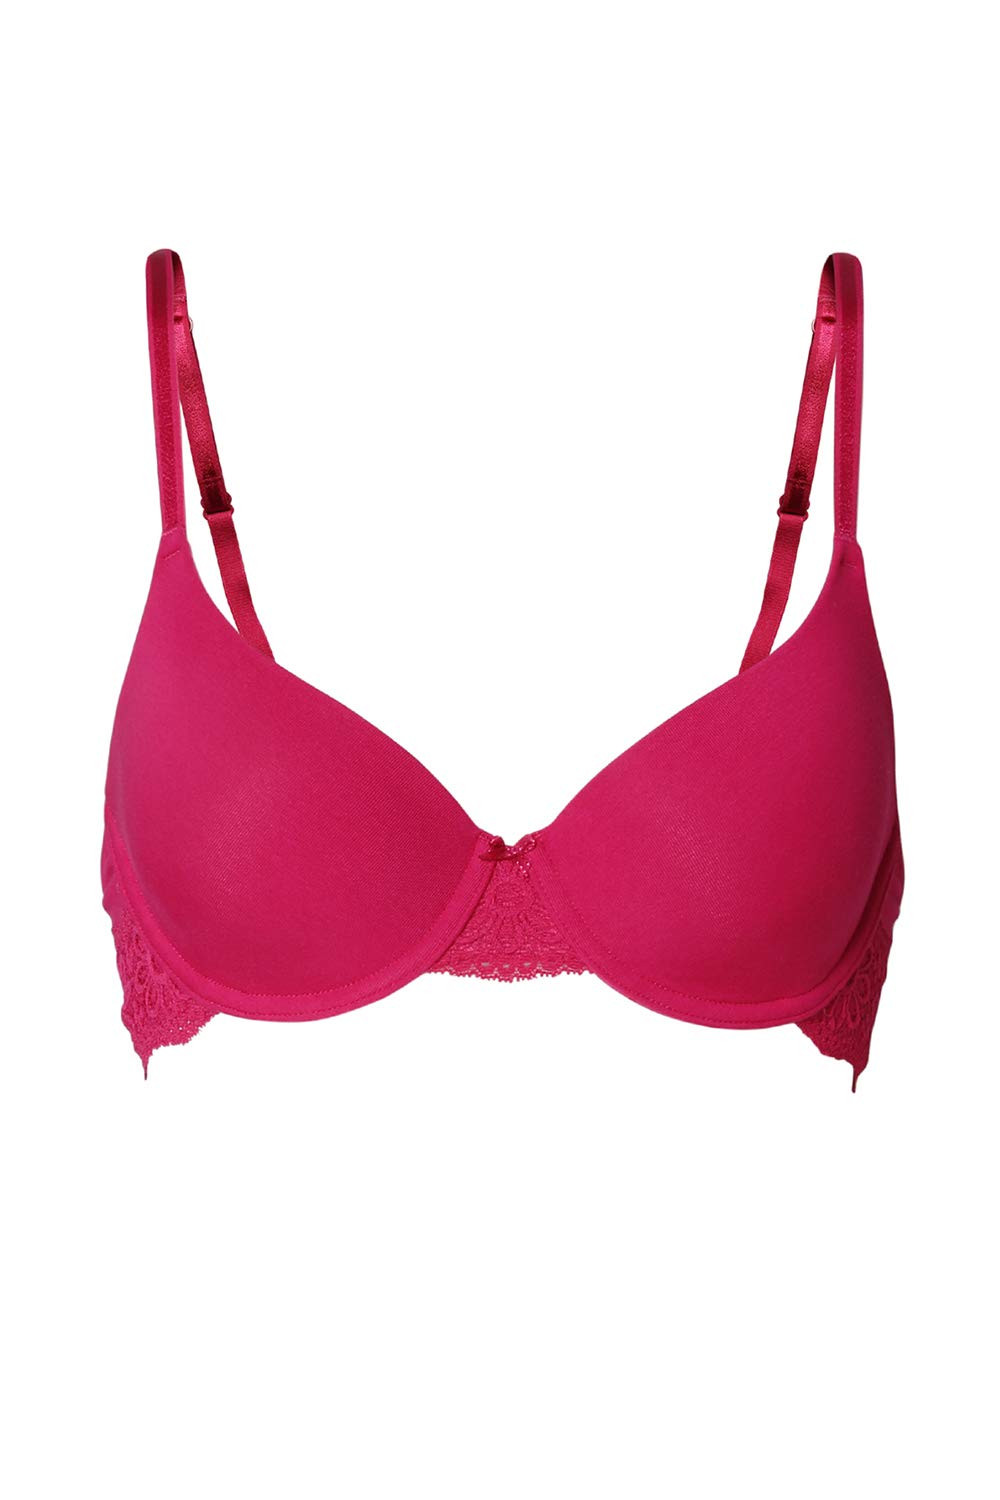 Amante 34C Sandalwood Push Up Bra in Basti - Dealers, Manufacturers &  Suppliers - Justdial